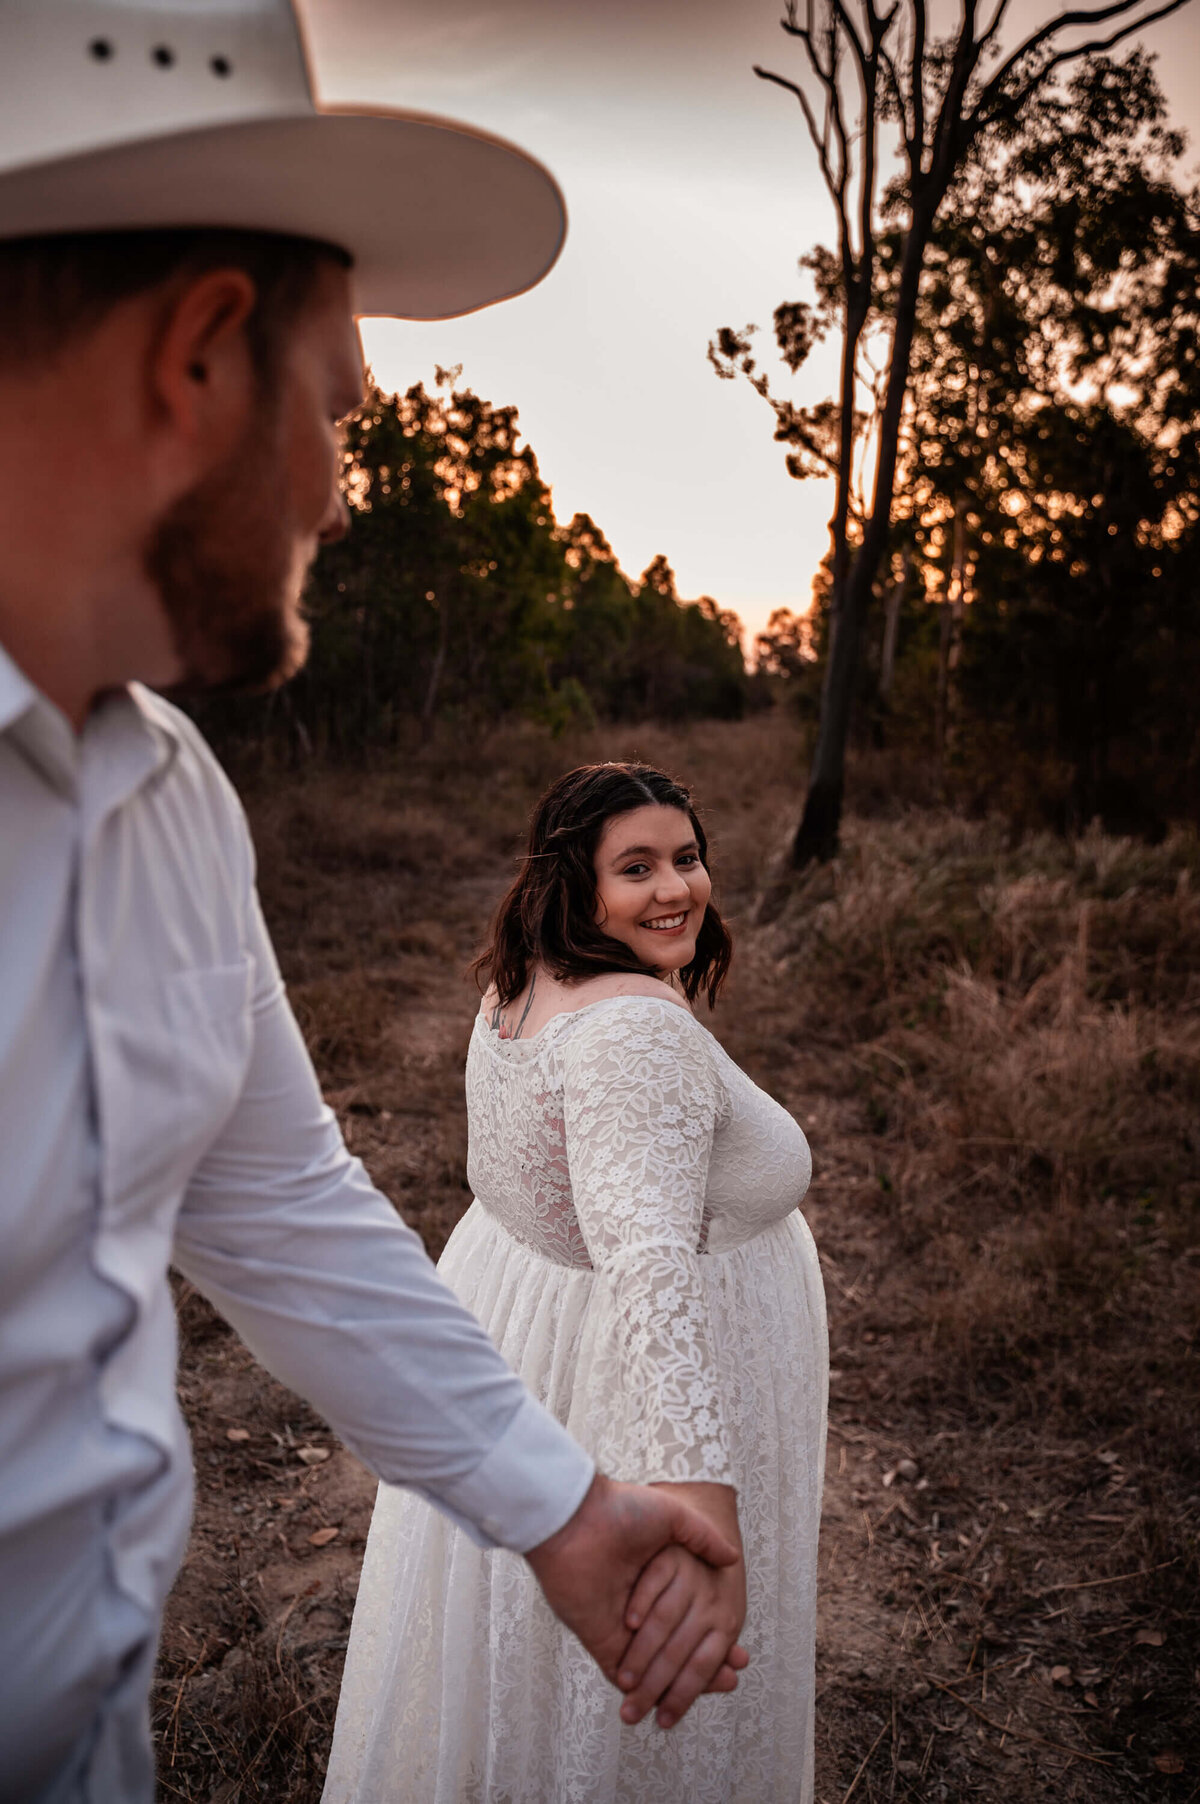 pregnant woman in white gown leading partner into the horizon along country road - Townsville Maternity Photography by Jamie Simmons